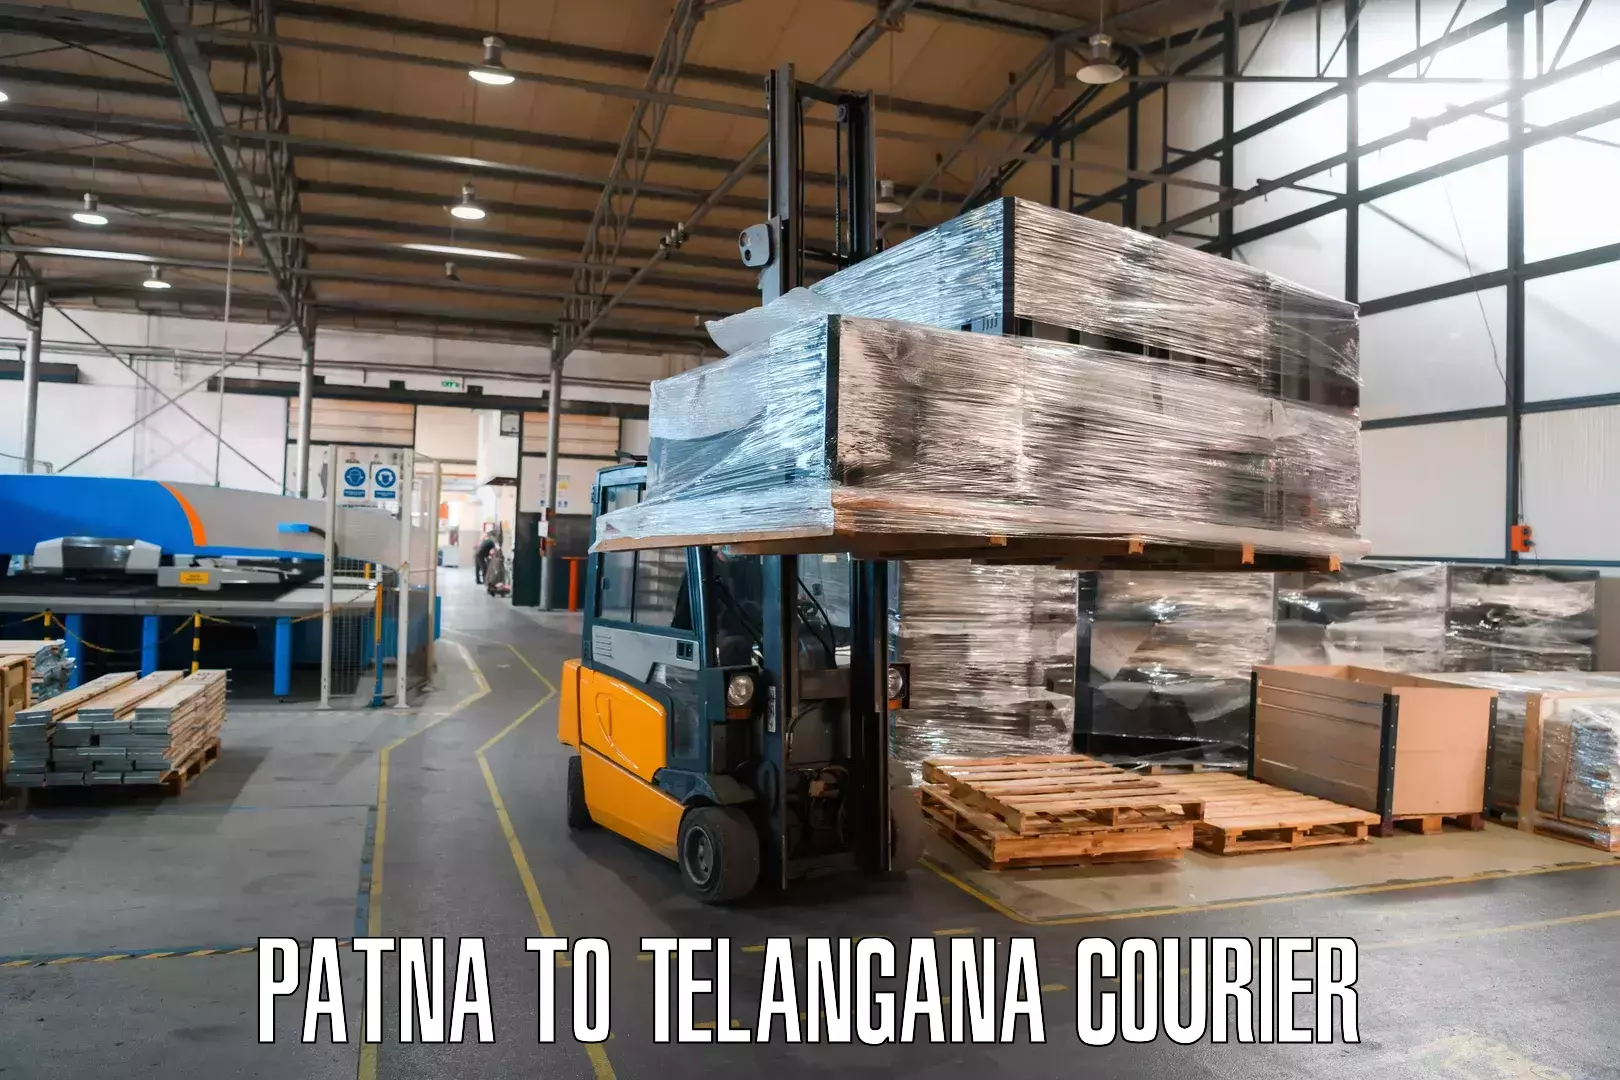 Multi-national courier services Patna to Rayaparthi